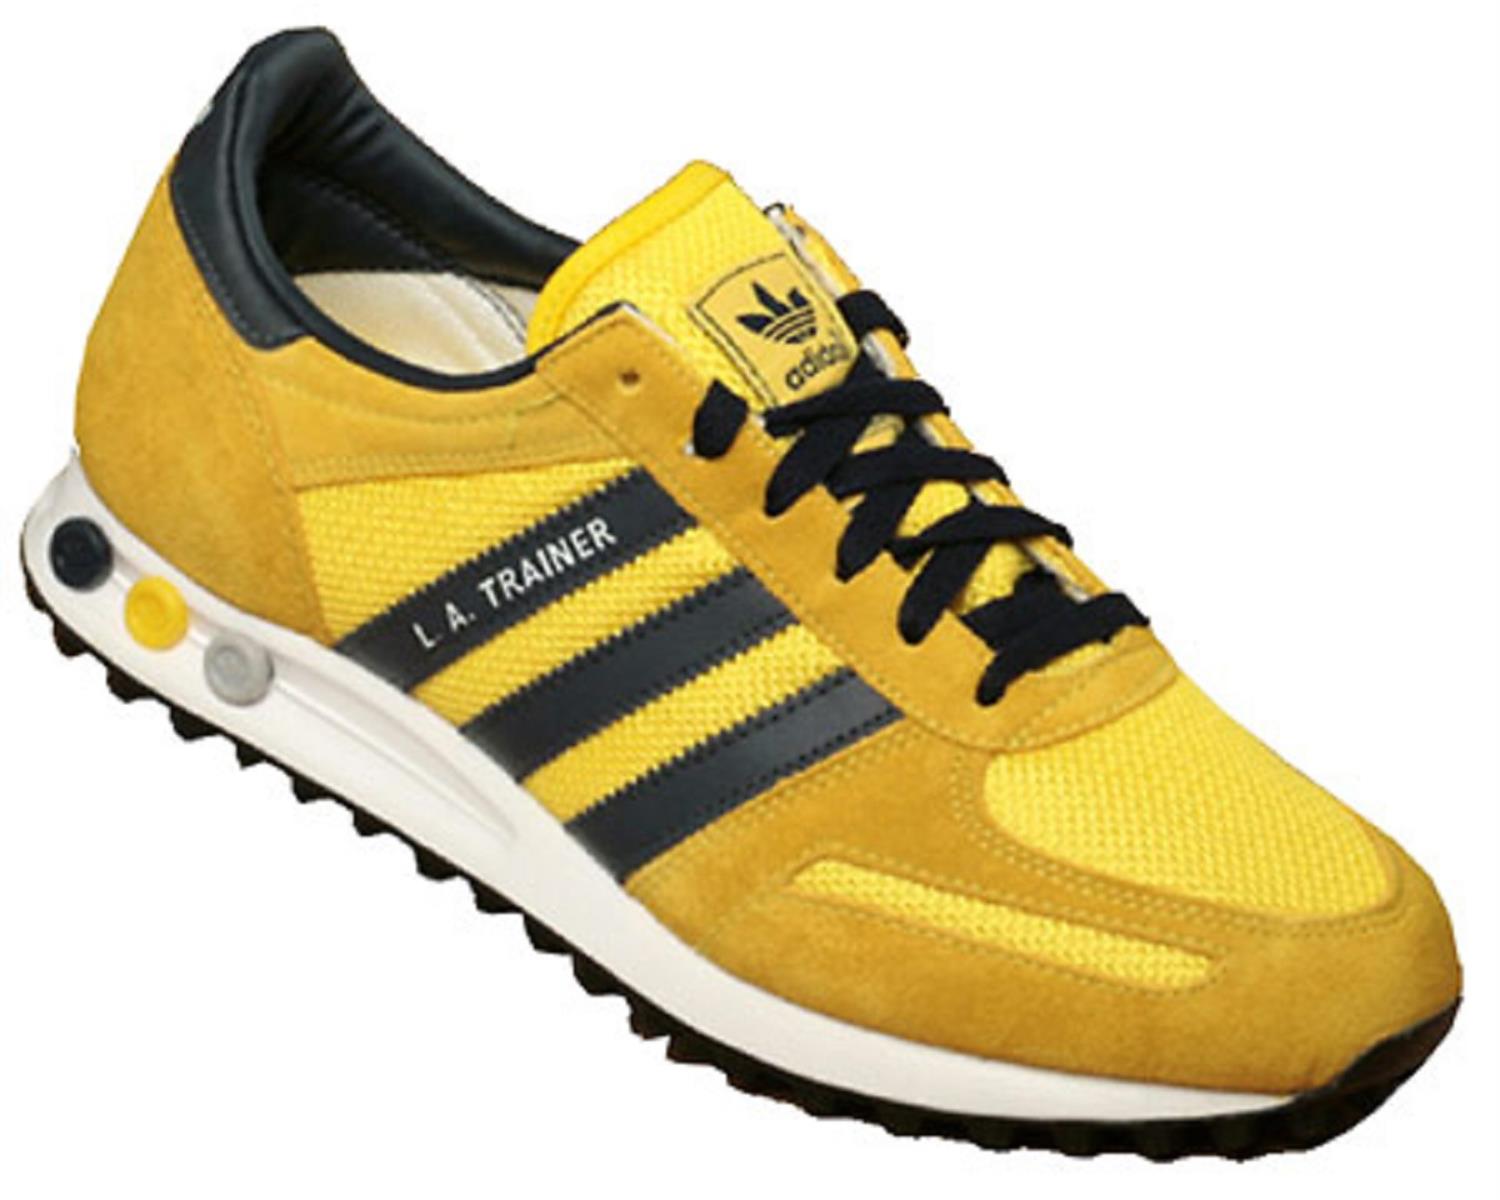 Purchase > adidas hamburg nere e gialle, Up to 77% OFF